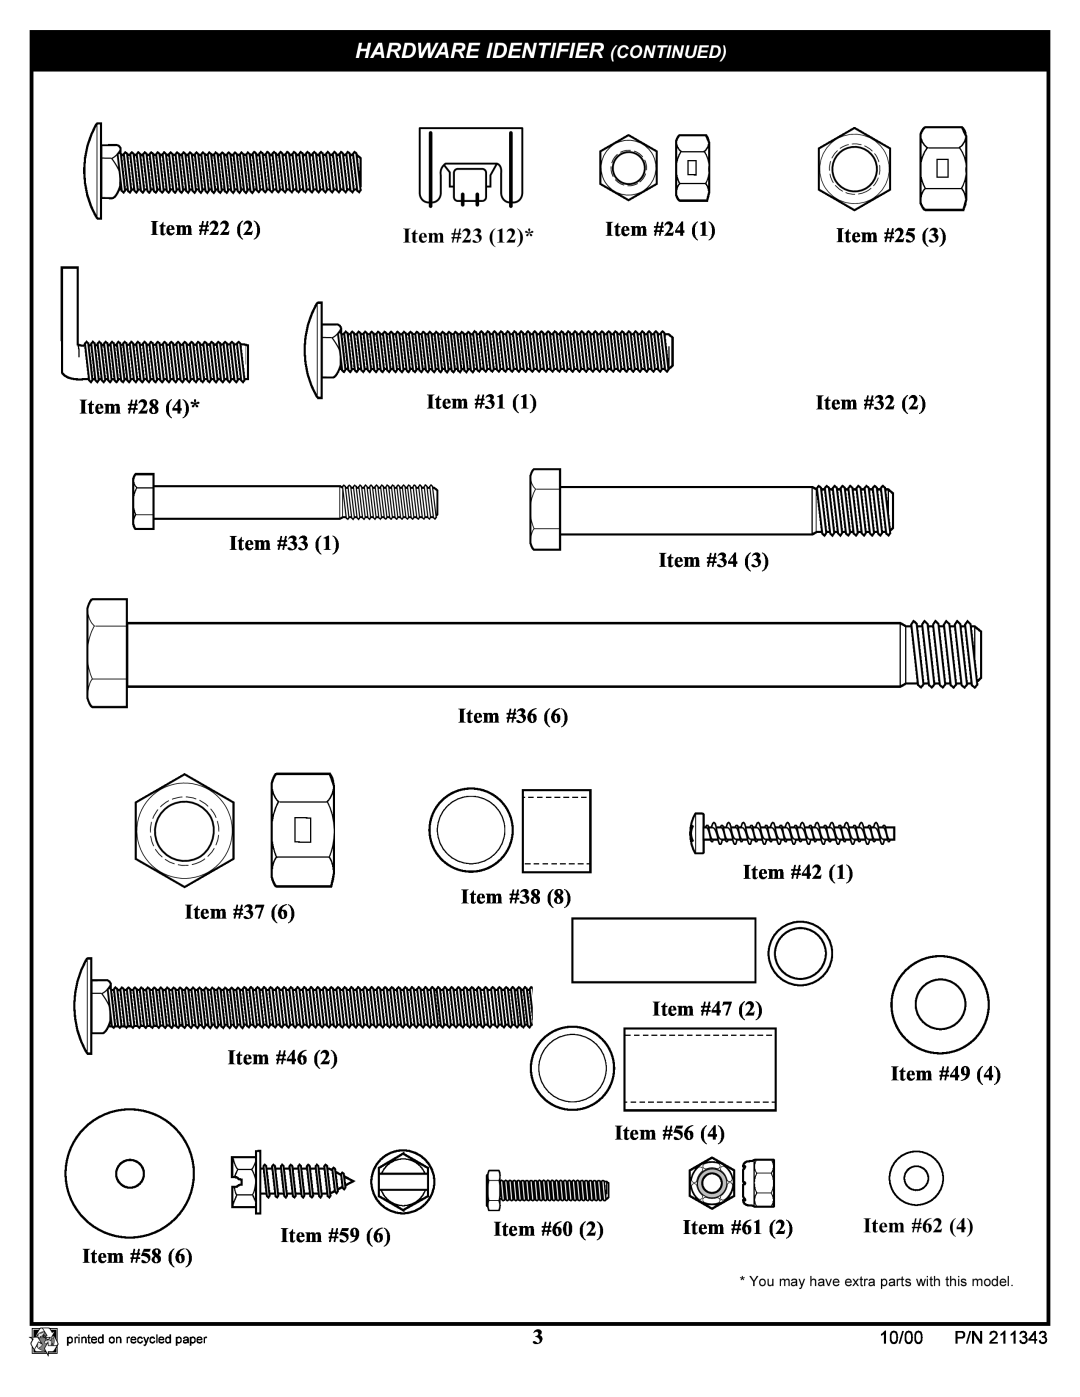 Huffy SA3244, SA3224, SA3226, SA3245, SA3246, SA3225, SA3216, SA3214, SA3215 manual Hardware Identifier Continued 